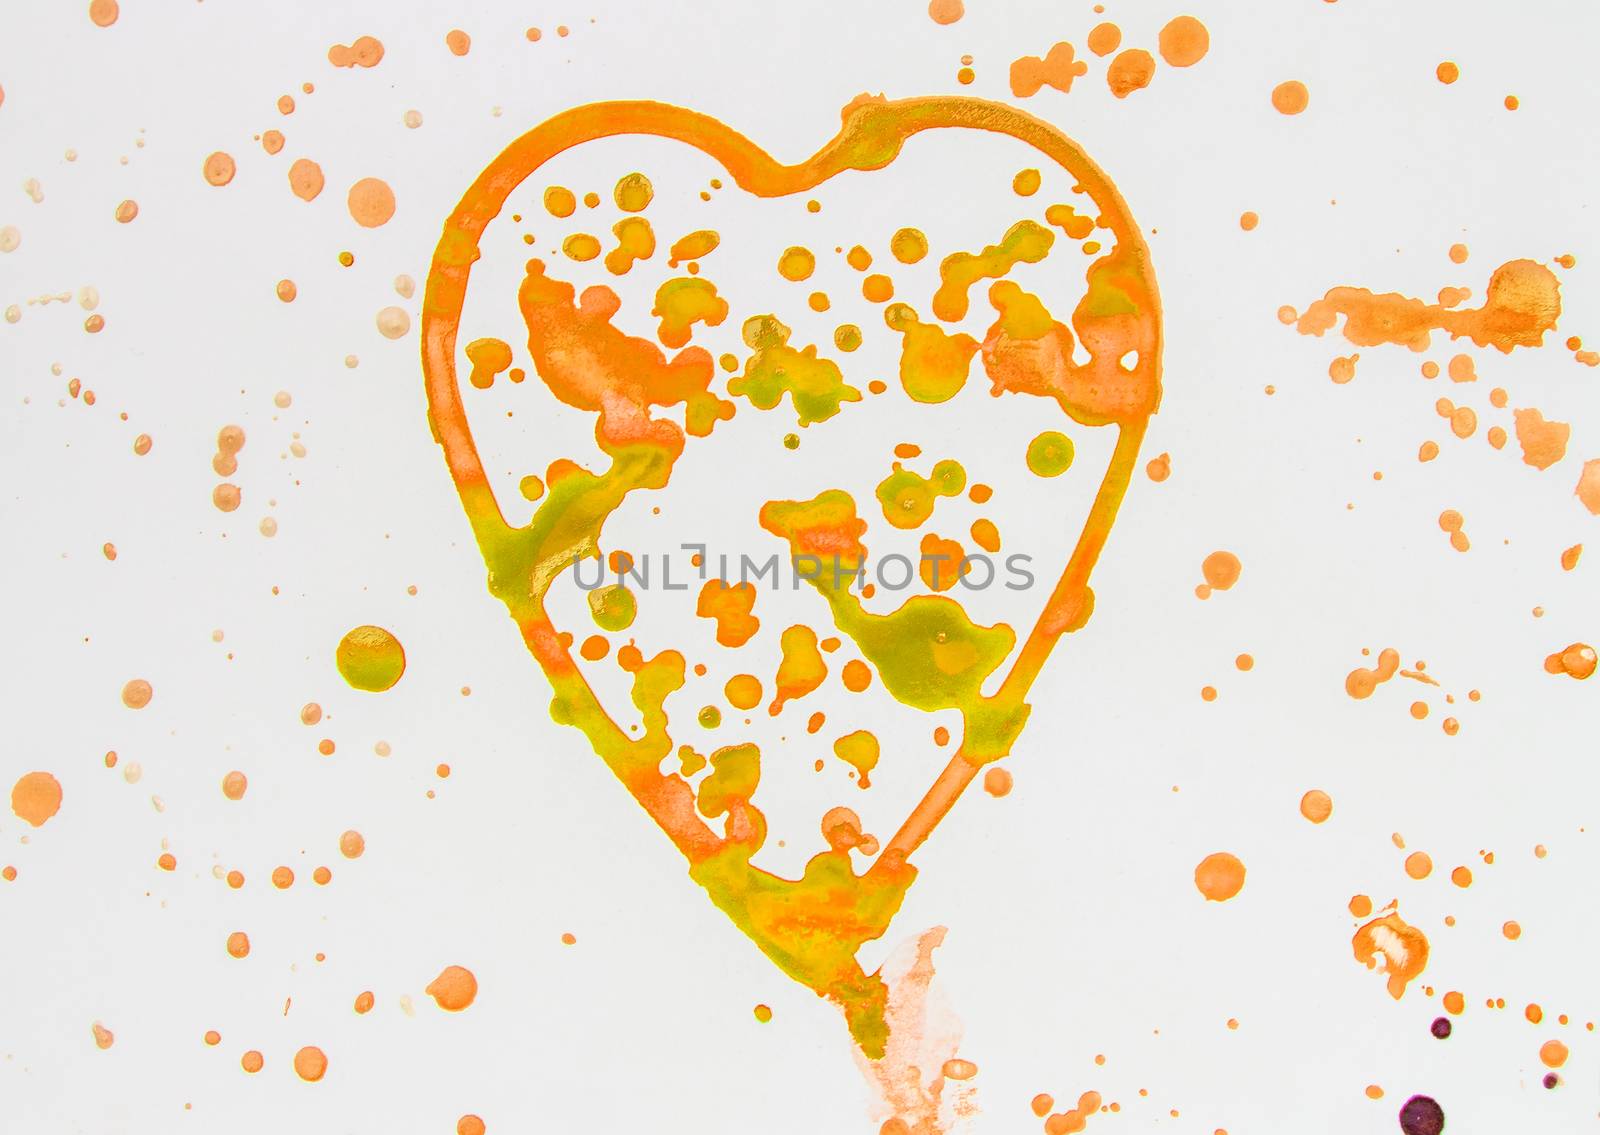 Heart with splashes of gold and orange watercolor on white background, cute, pattern, hand painted by claire_lucia